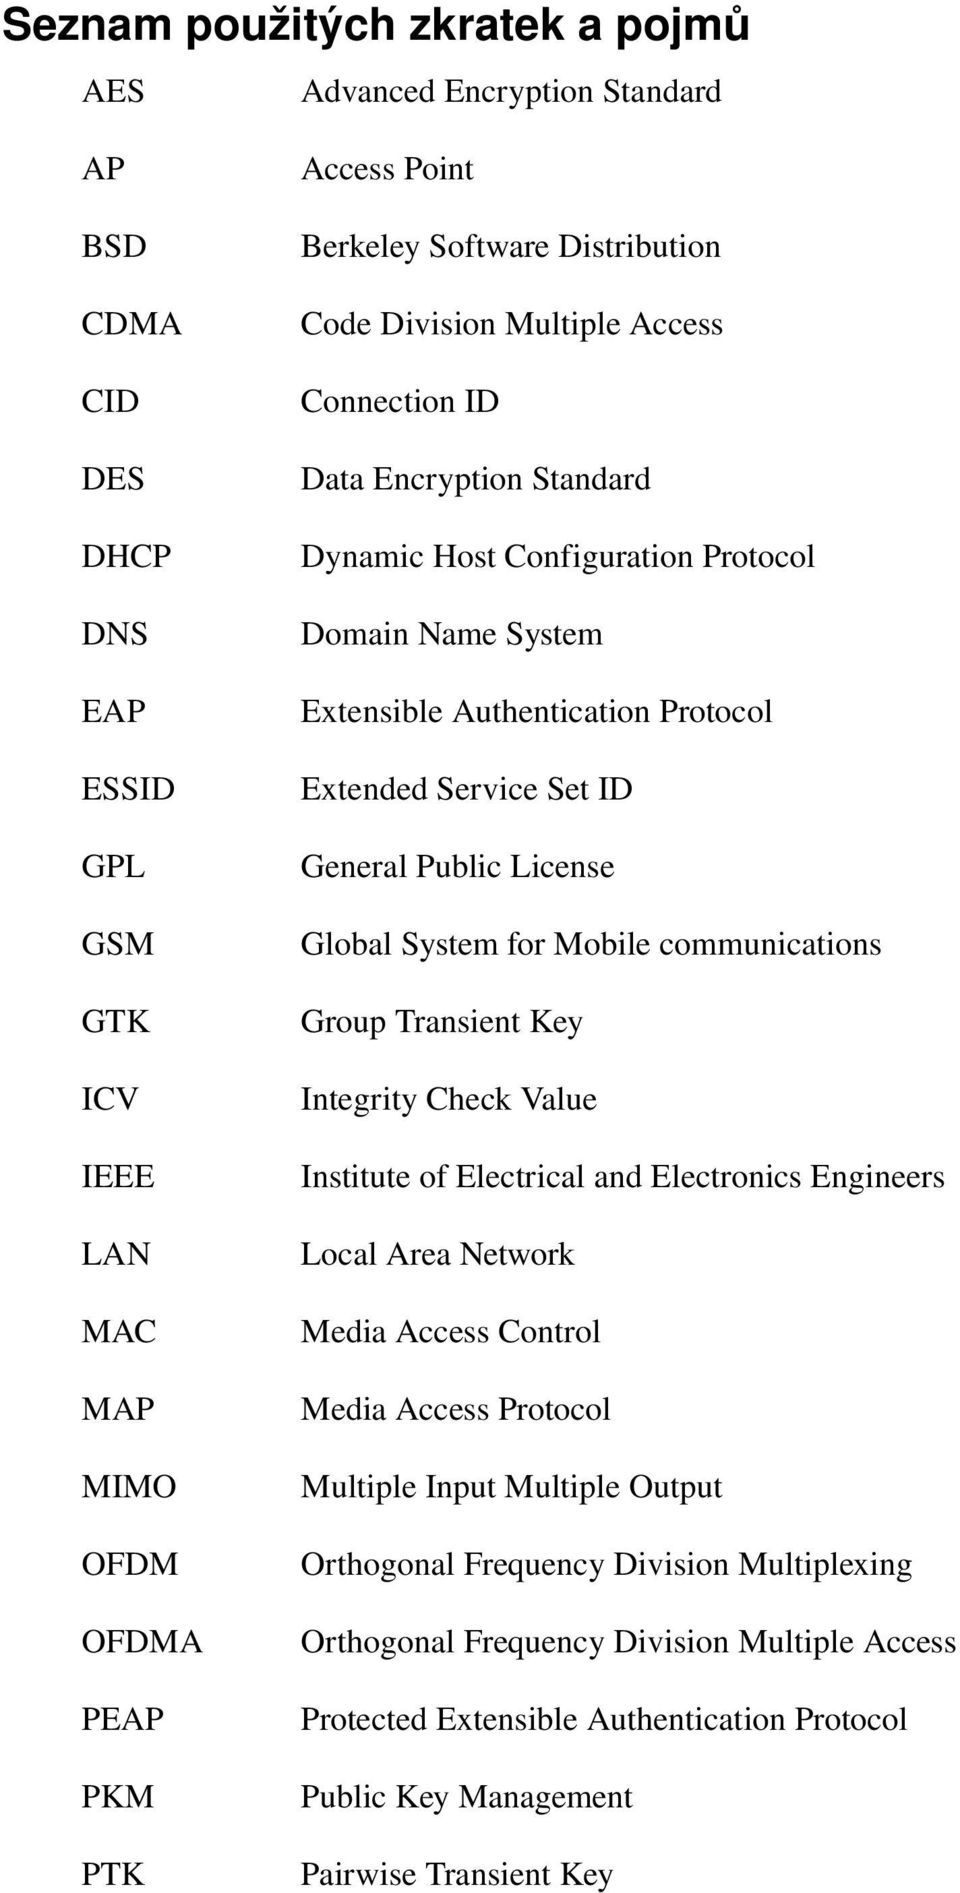 communications GTK Group Transient Key ICV Integrity Check Value IEEE Institute of Electrical and Electronics Engineers LAN Local Area Network MAC Media Access Control MAP Media Access Protocol MIMO